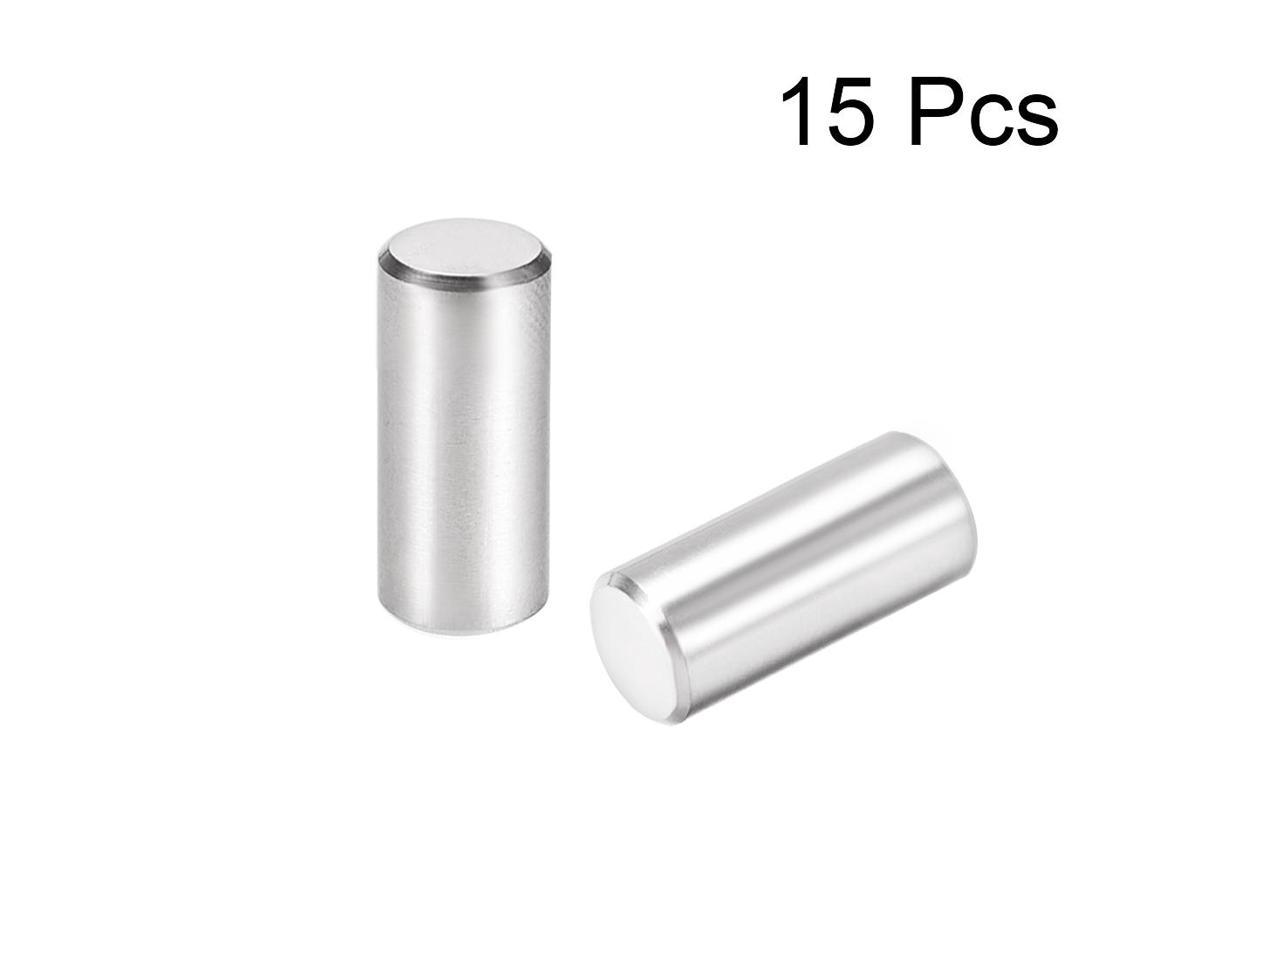 10Pcs 8mm X 16mm Dowel Pin 304 Stainless Steel Cylindrical Shelf Support Pin 